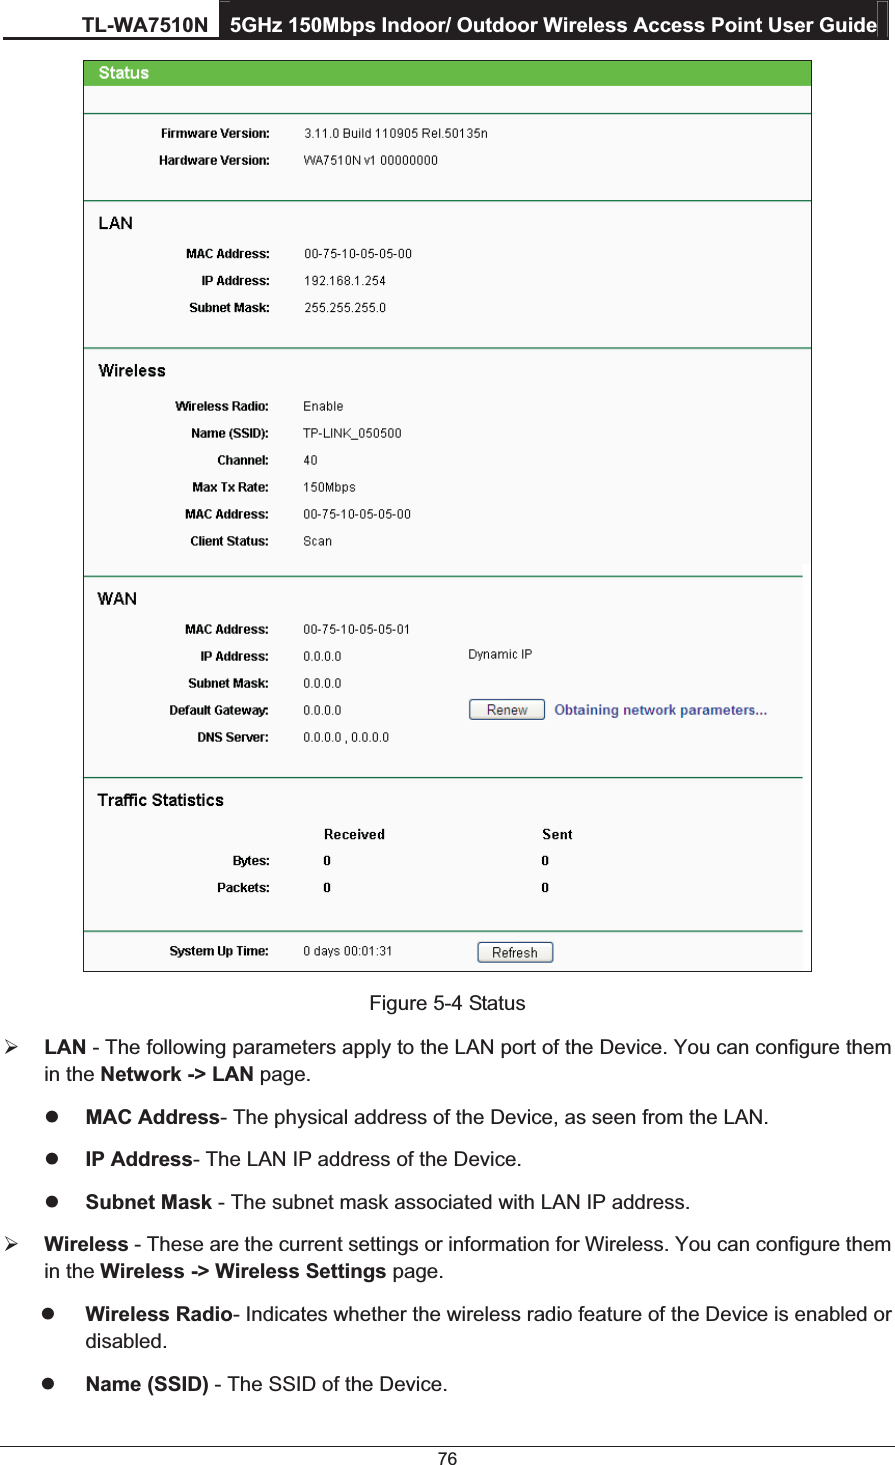 TL-WA7510N 5GHz 150Mbps Indoor/ Outdoor Wireless Access Point User Guide 76  Figure 5-4 Status ¾ LAN - The following parameters apply to the LAN port of the Device. You can configure them in the Network -&gt; LAN page. z MAC Address- The physical address of the Device, as seen from the LAN. z IP Address- The LAN IP address of the Device. z Subnet Mask - The subnet mask associated with LAN IP address. ¾ Wireless - These are the current settings or information for Wireless. You can configure them in the Wireless -&gt; Wireless Settings page. z Wireless Radio- Indicates whether the wireless radio feature of the Device is enabled or  disabled. z Name (SSID) - The SSID of the Device. 